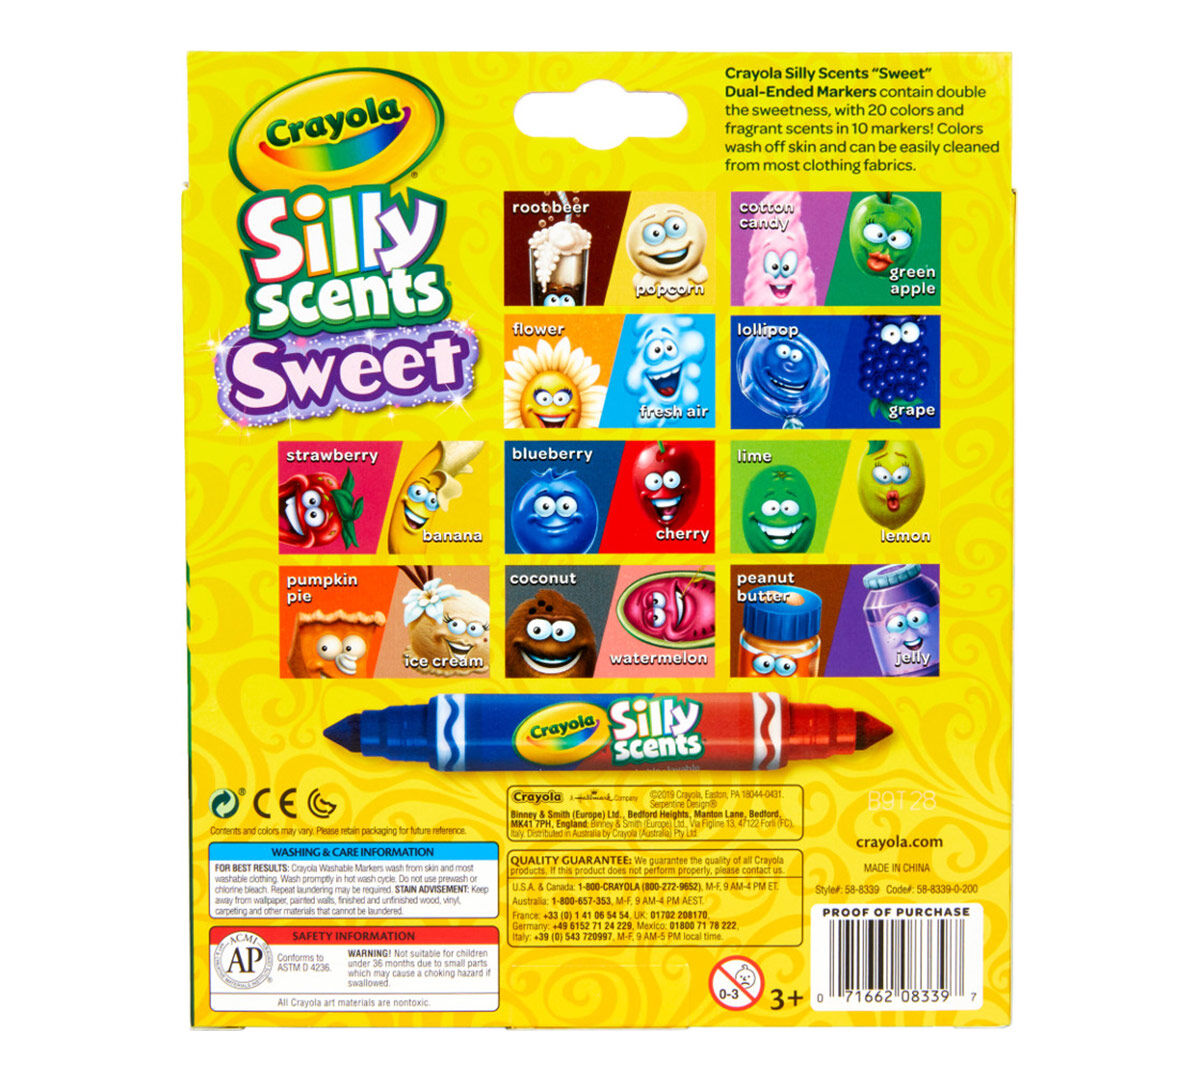 Crayola Silly Scents Dual-Ended Art Markers, School Supplies, Beginner Child, 10 Count - image 5 of 6